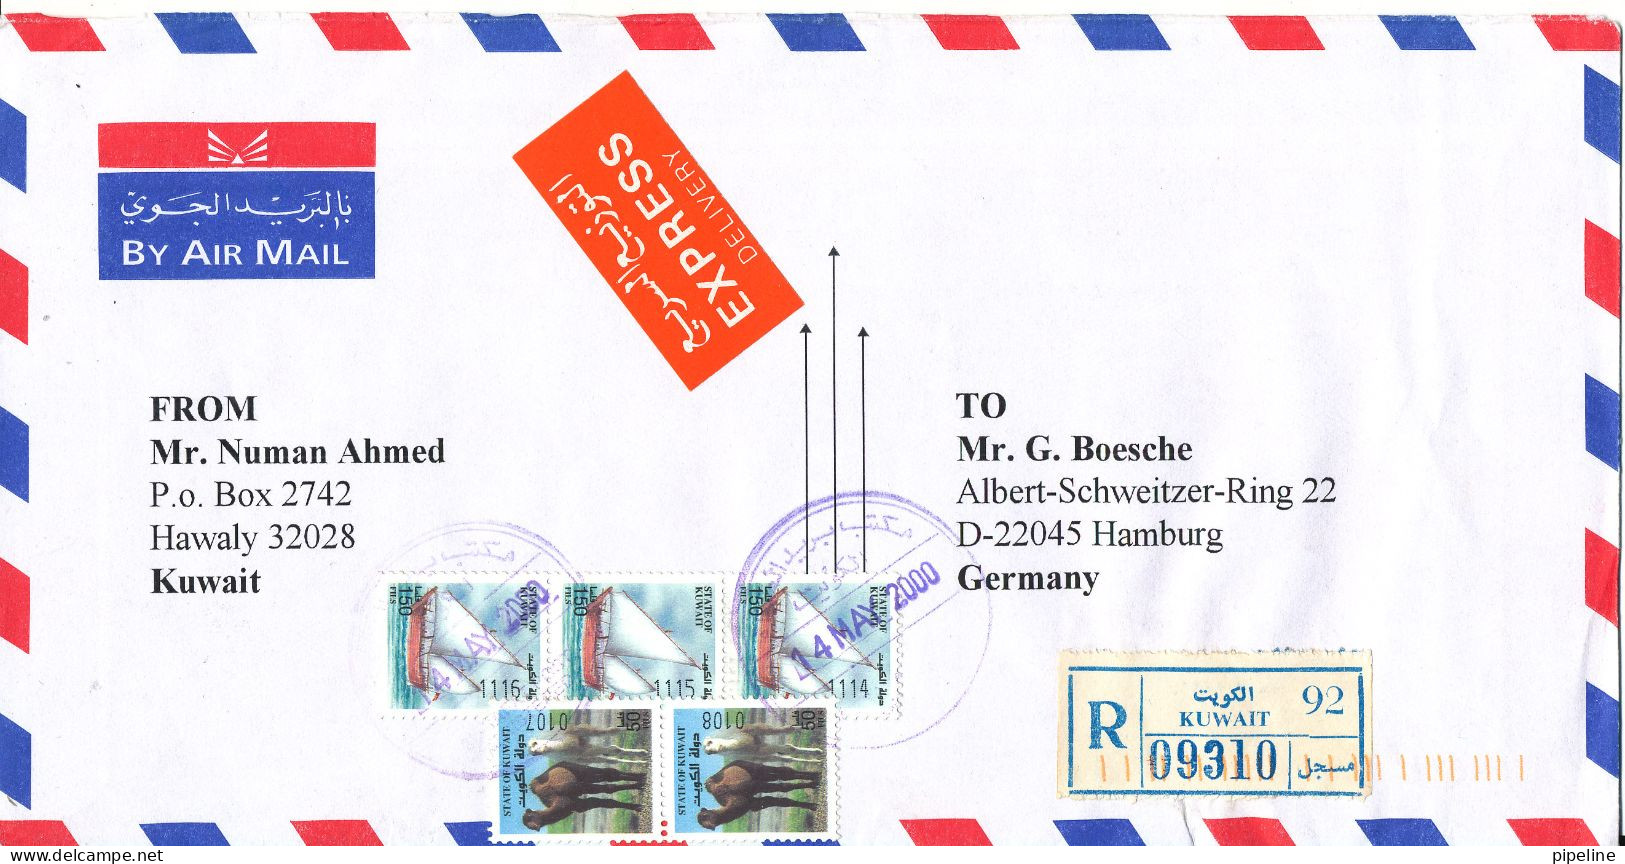 Kuwait Registered Express Air Mail Cover Sent To Germany 14-5-2000 - Kuwait